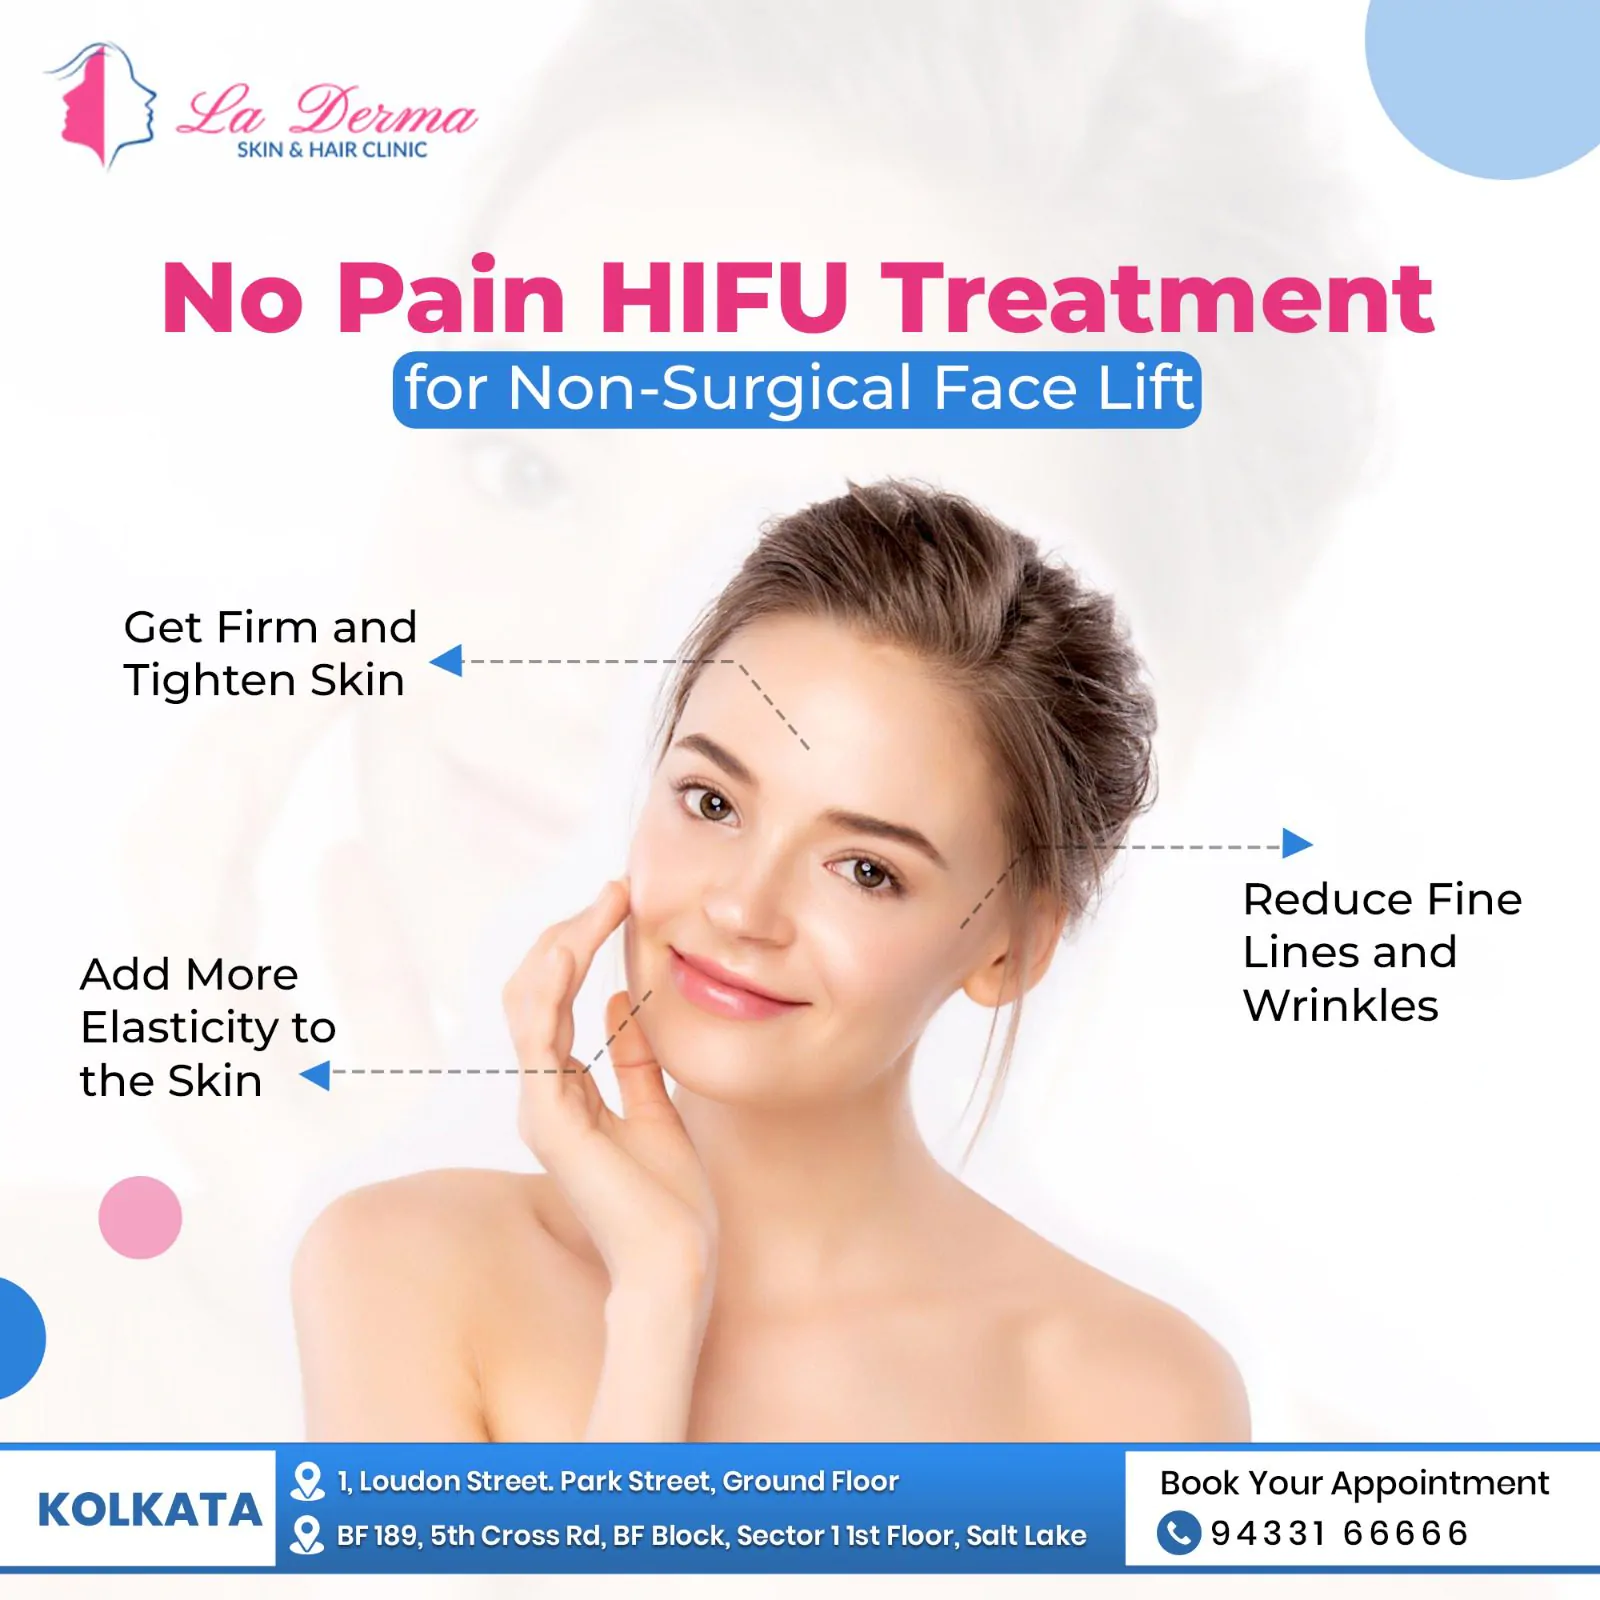 Non-Surgical Face Lift with No Pain HIFU Treatment!